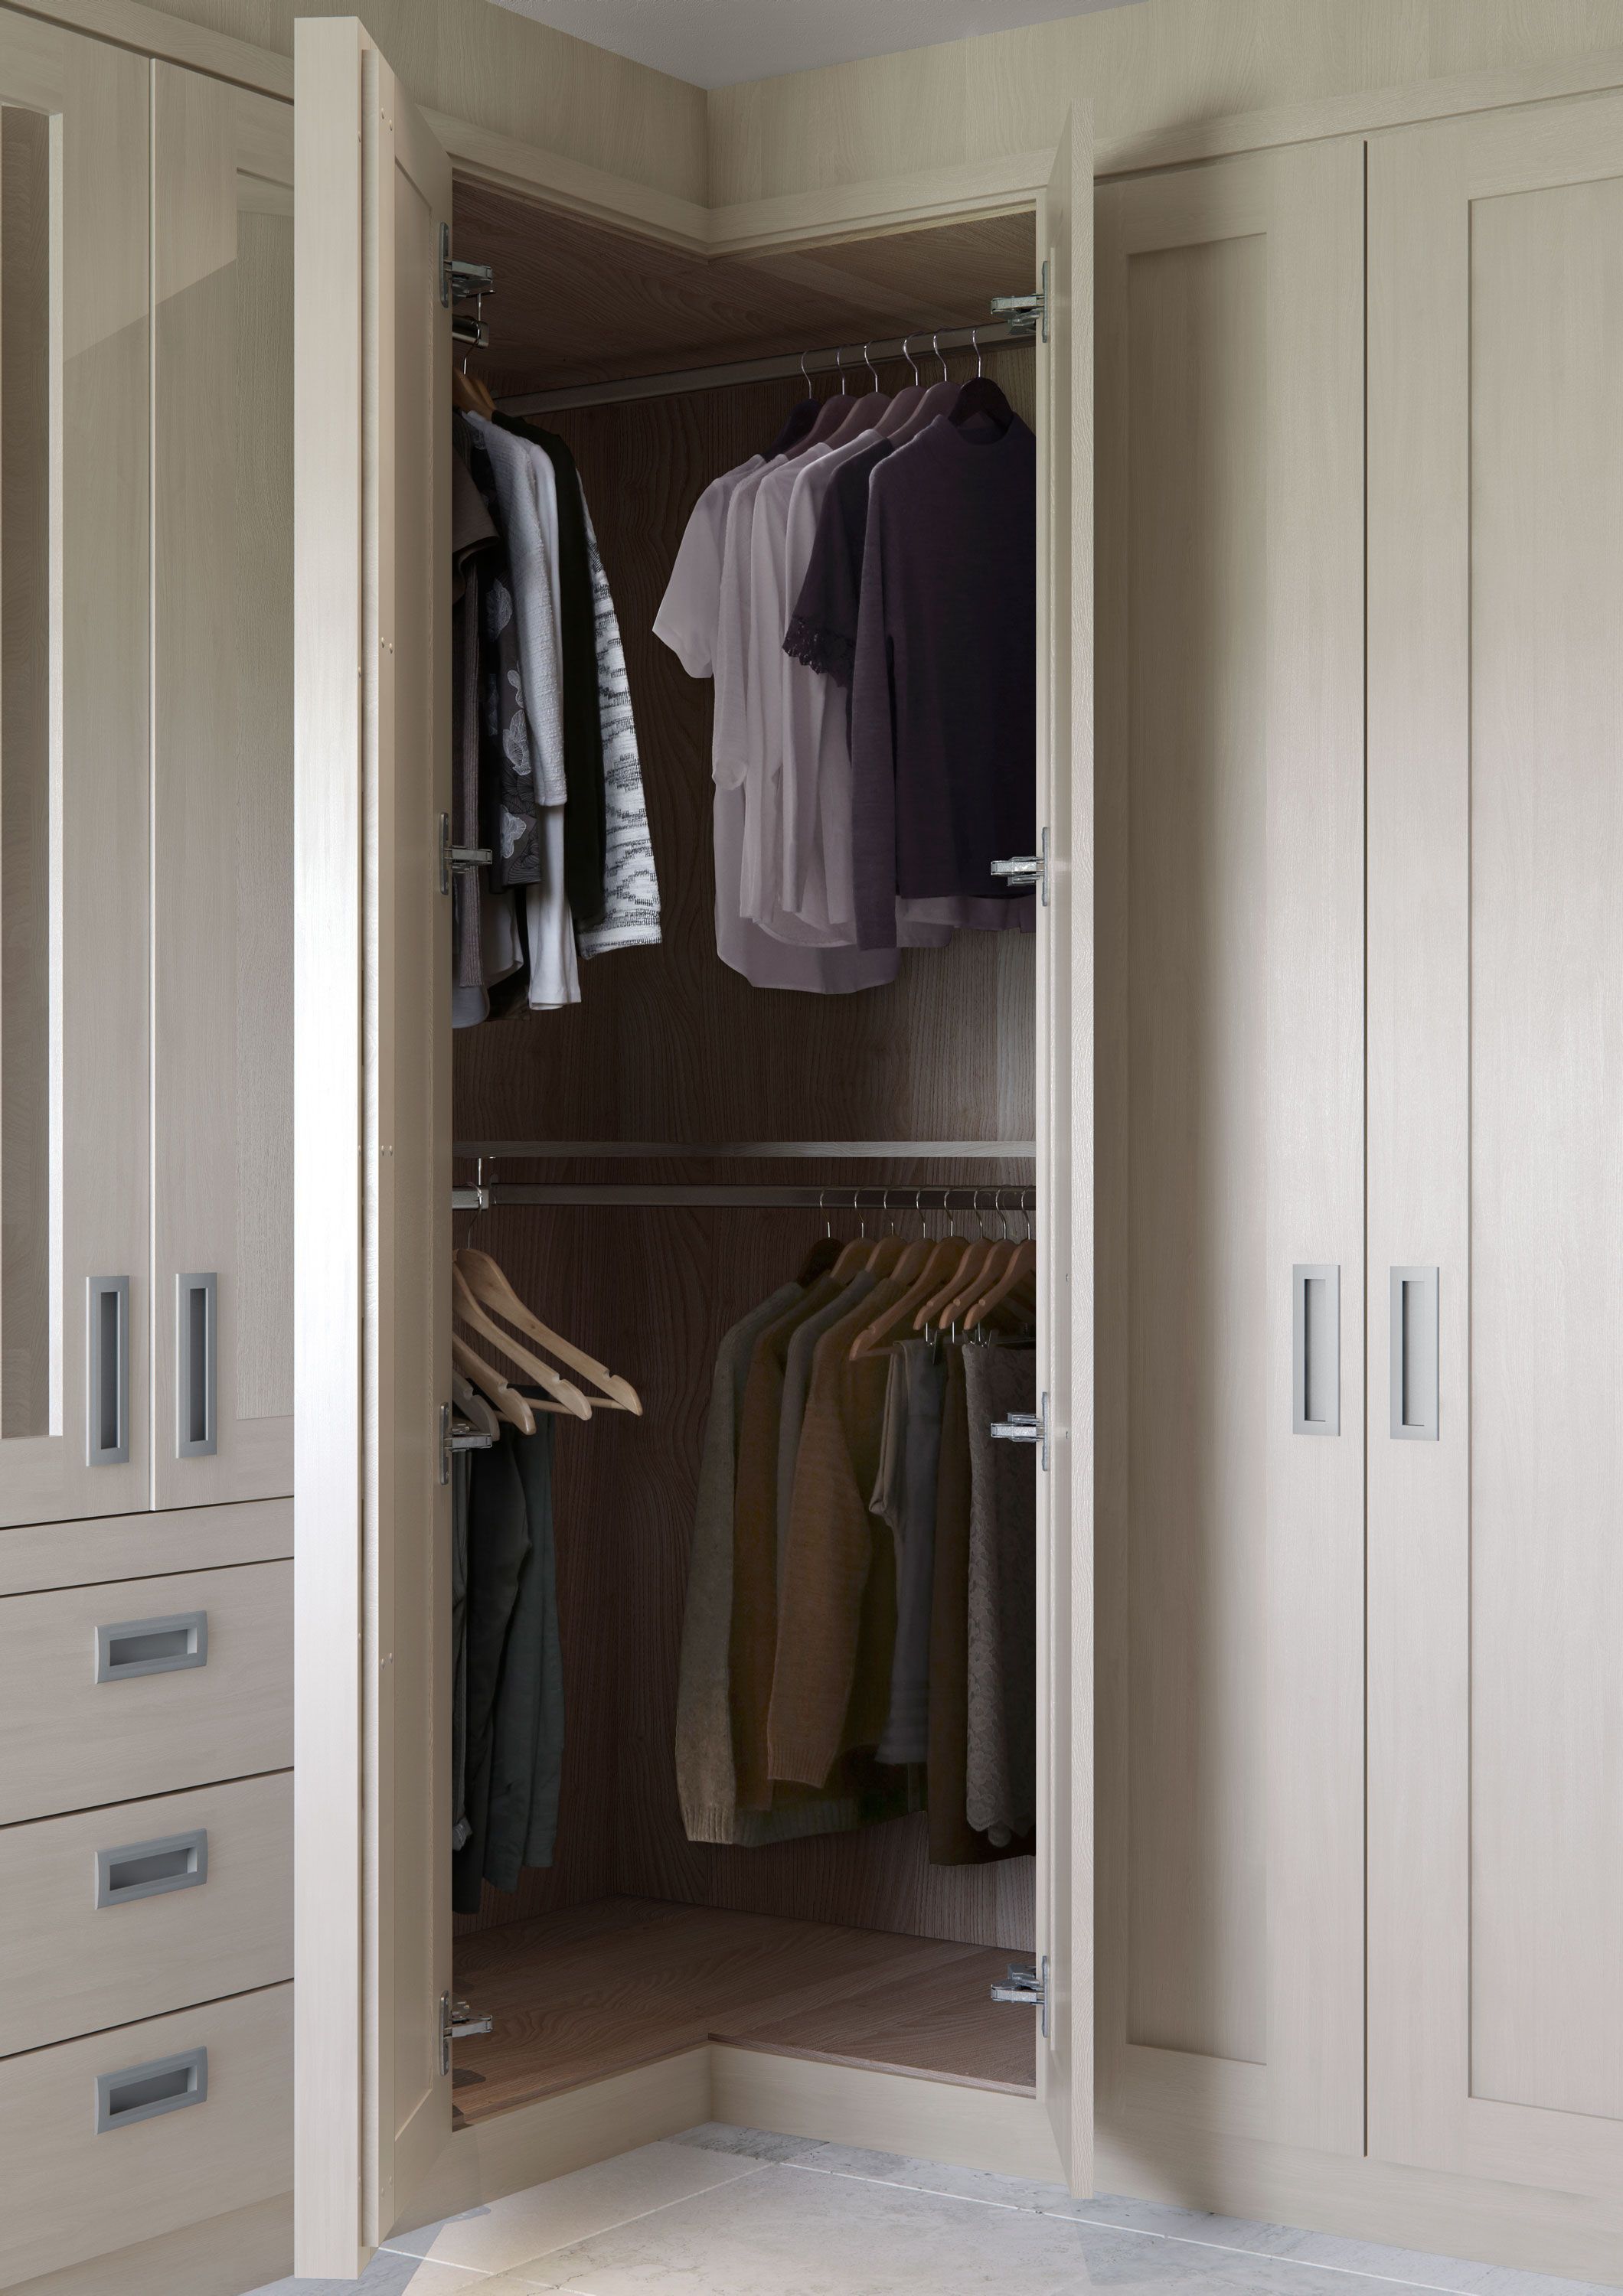 Make The Most Of The Corner Space With This Angled Double Hanging Rail. |  Corner Wardrobe, Fitted Wardrobes Bedroom, Corner Wardrobe Closet With Tall Double Hanging Rail Wardrobes (Photo 7 of 15)